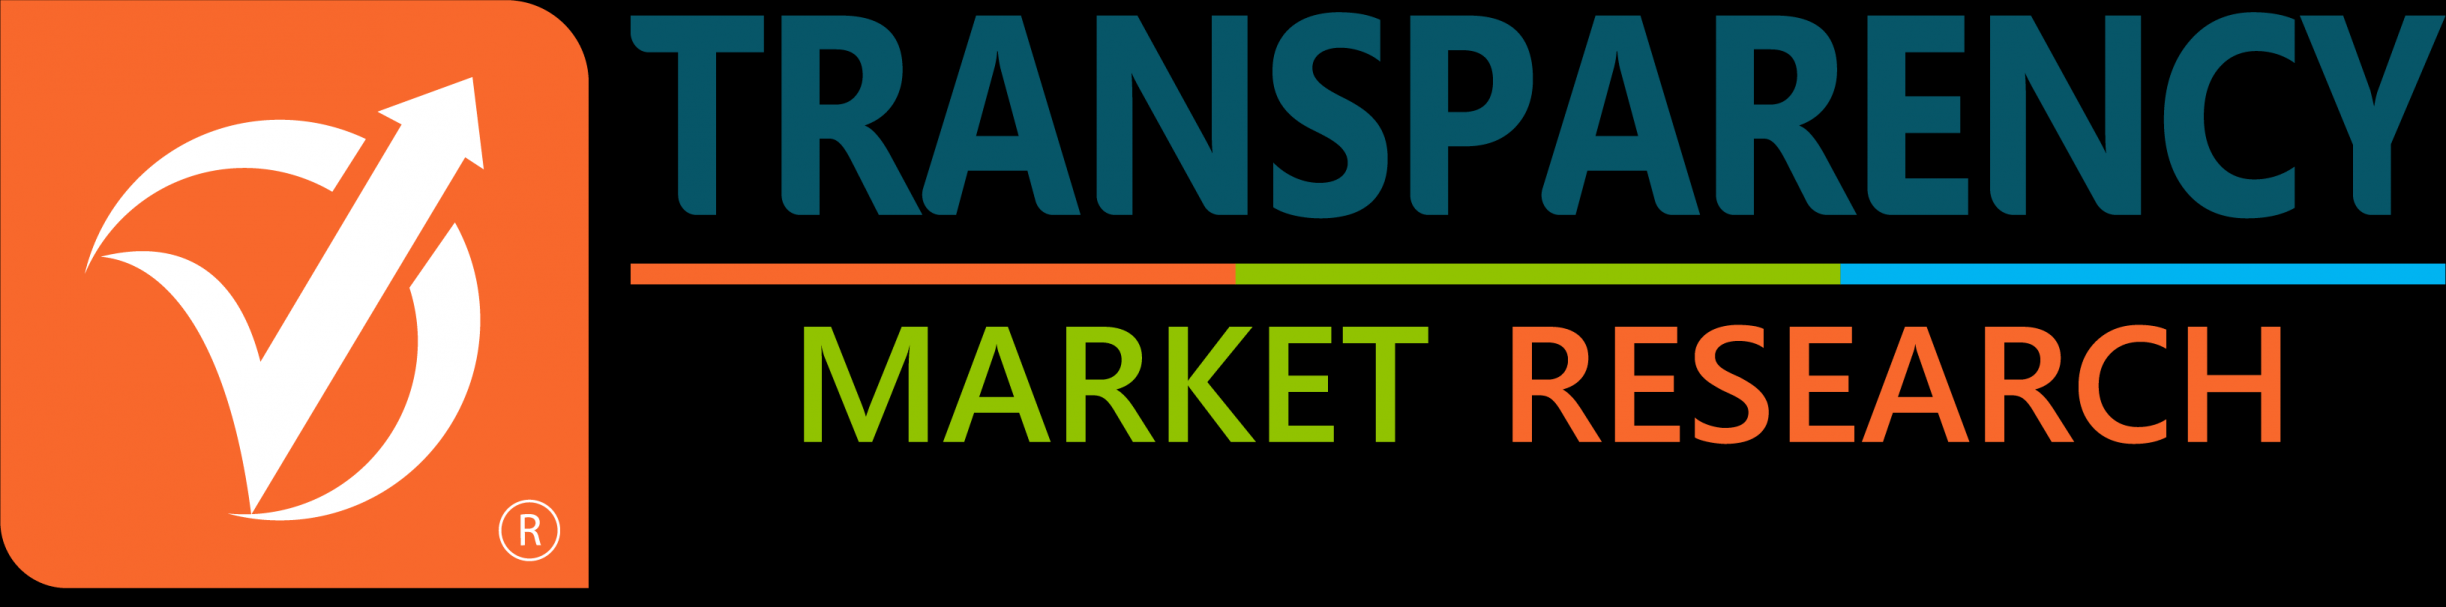 https://www.transparencymarketresearch.com/assets/webstyle/images/tmr-logo.png